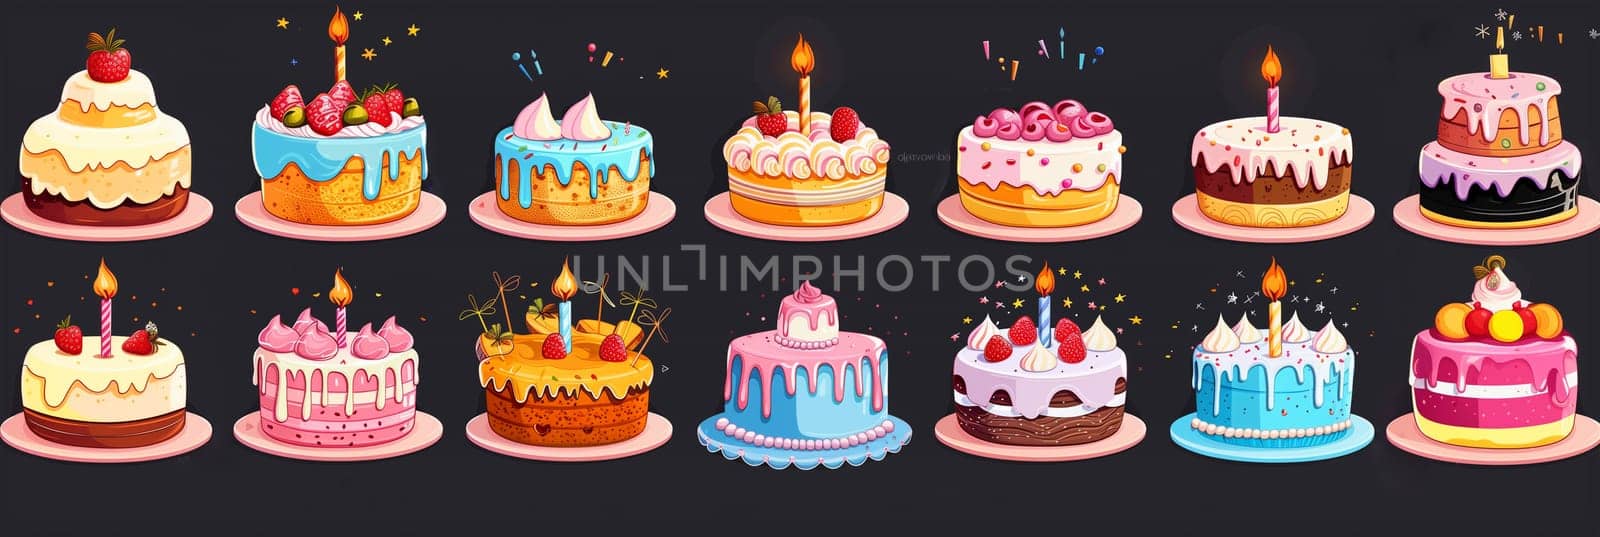 Multiple birthday cakes placed together adorned with glowing candles.